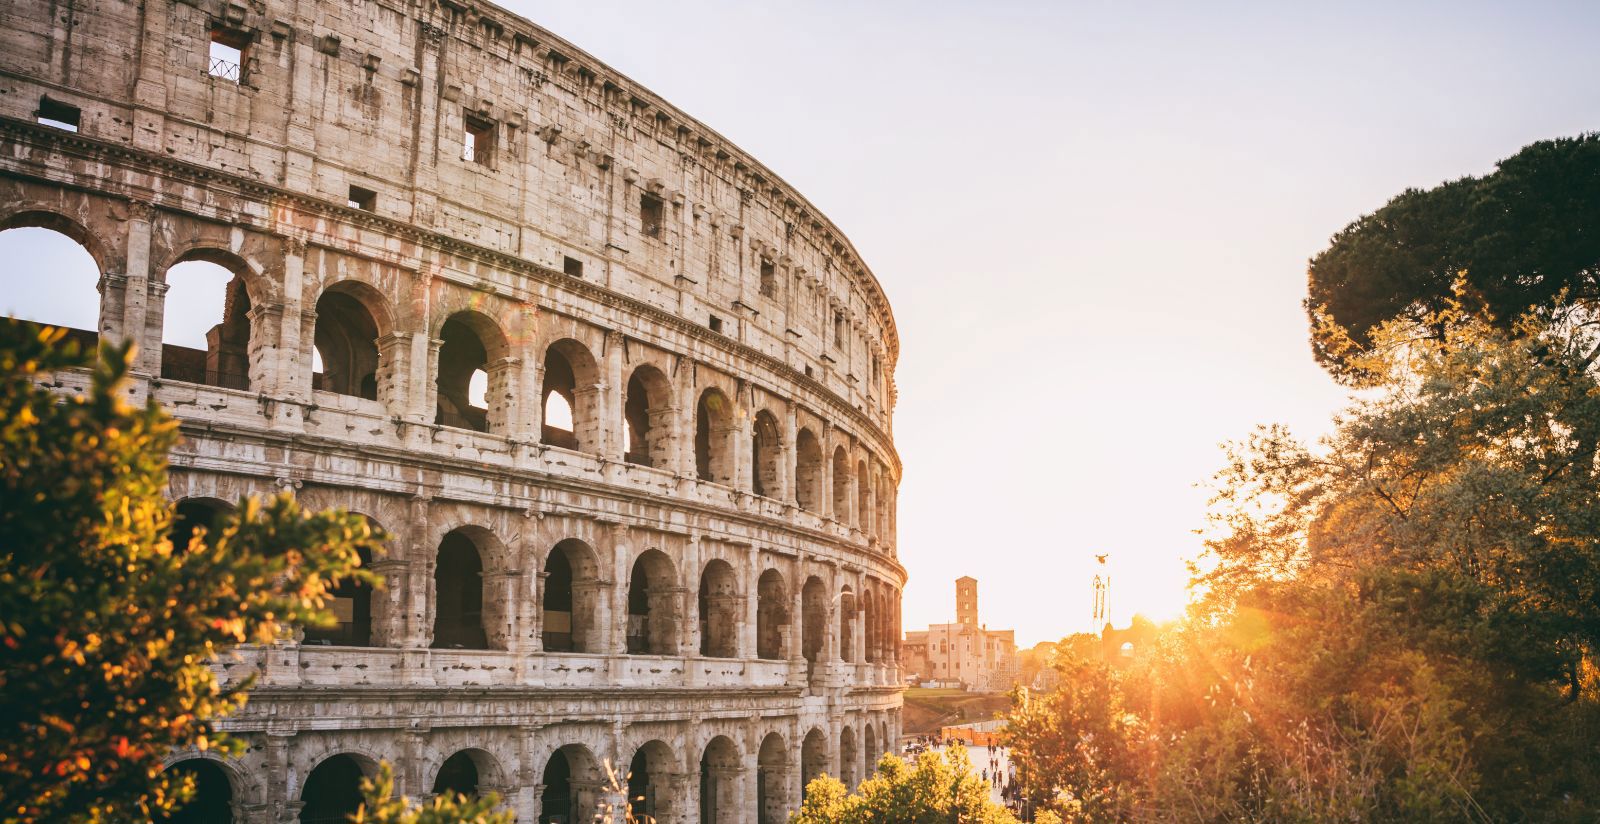 COLOSSEUM AND ANCIENT ROME